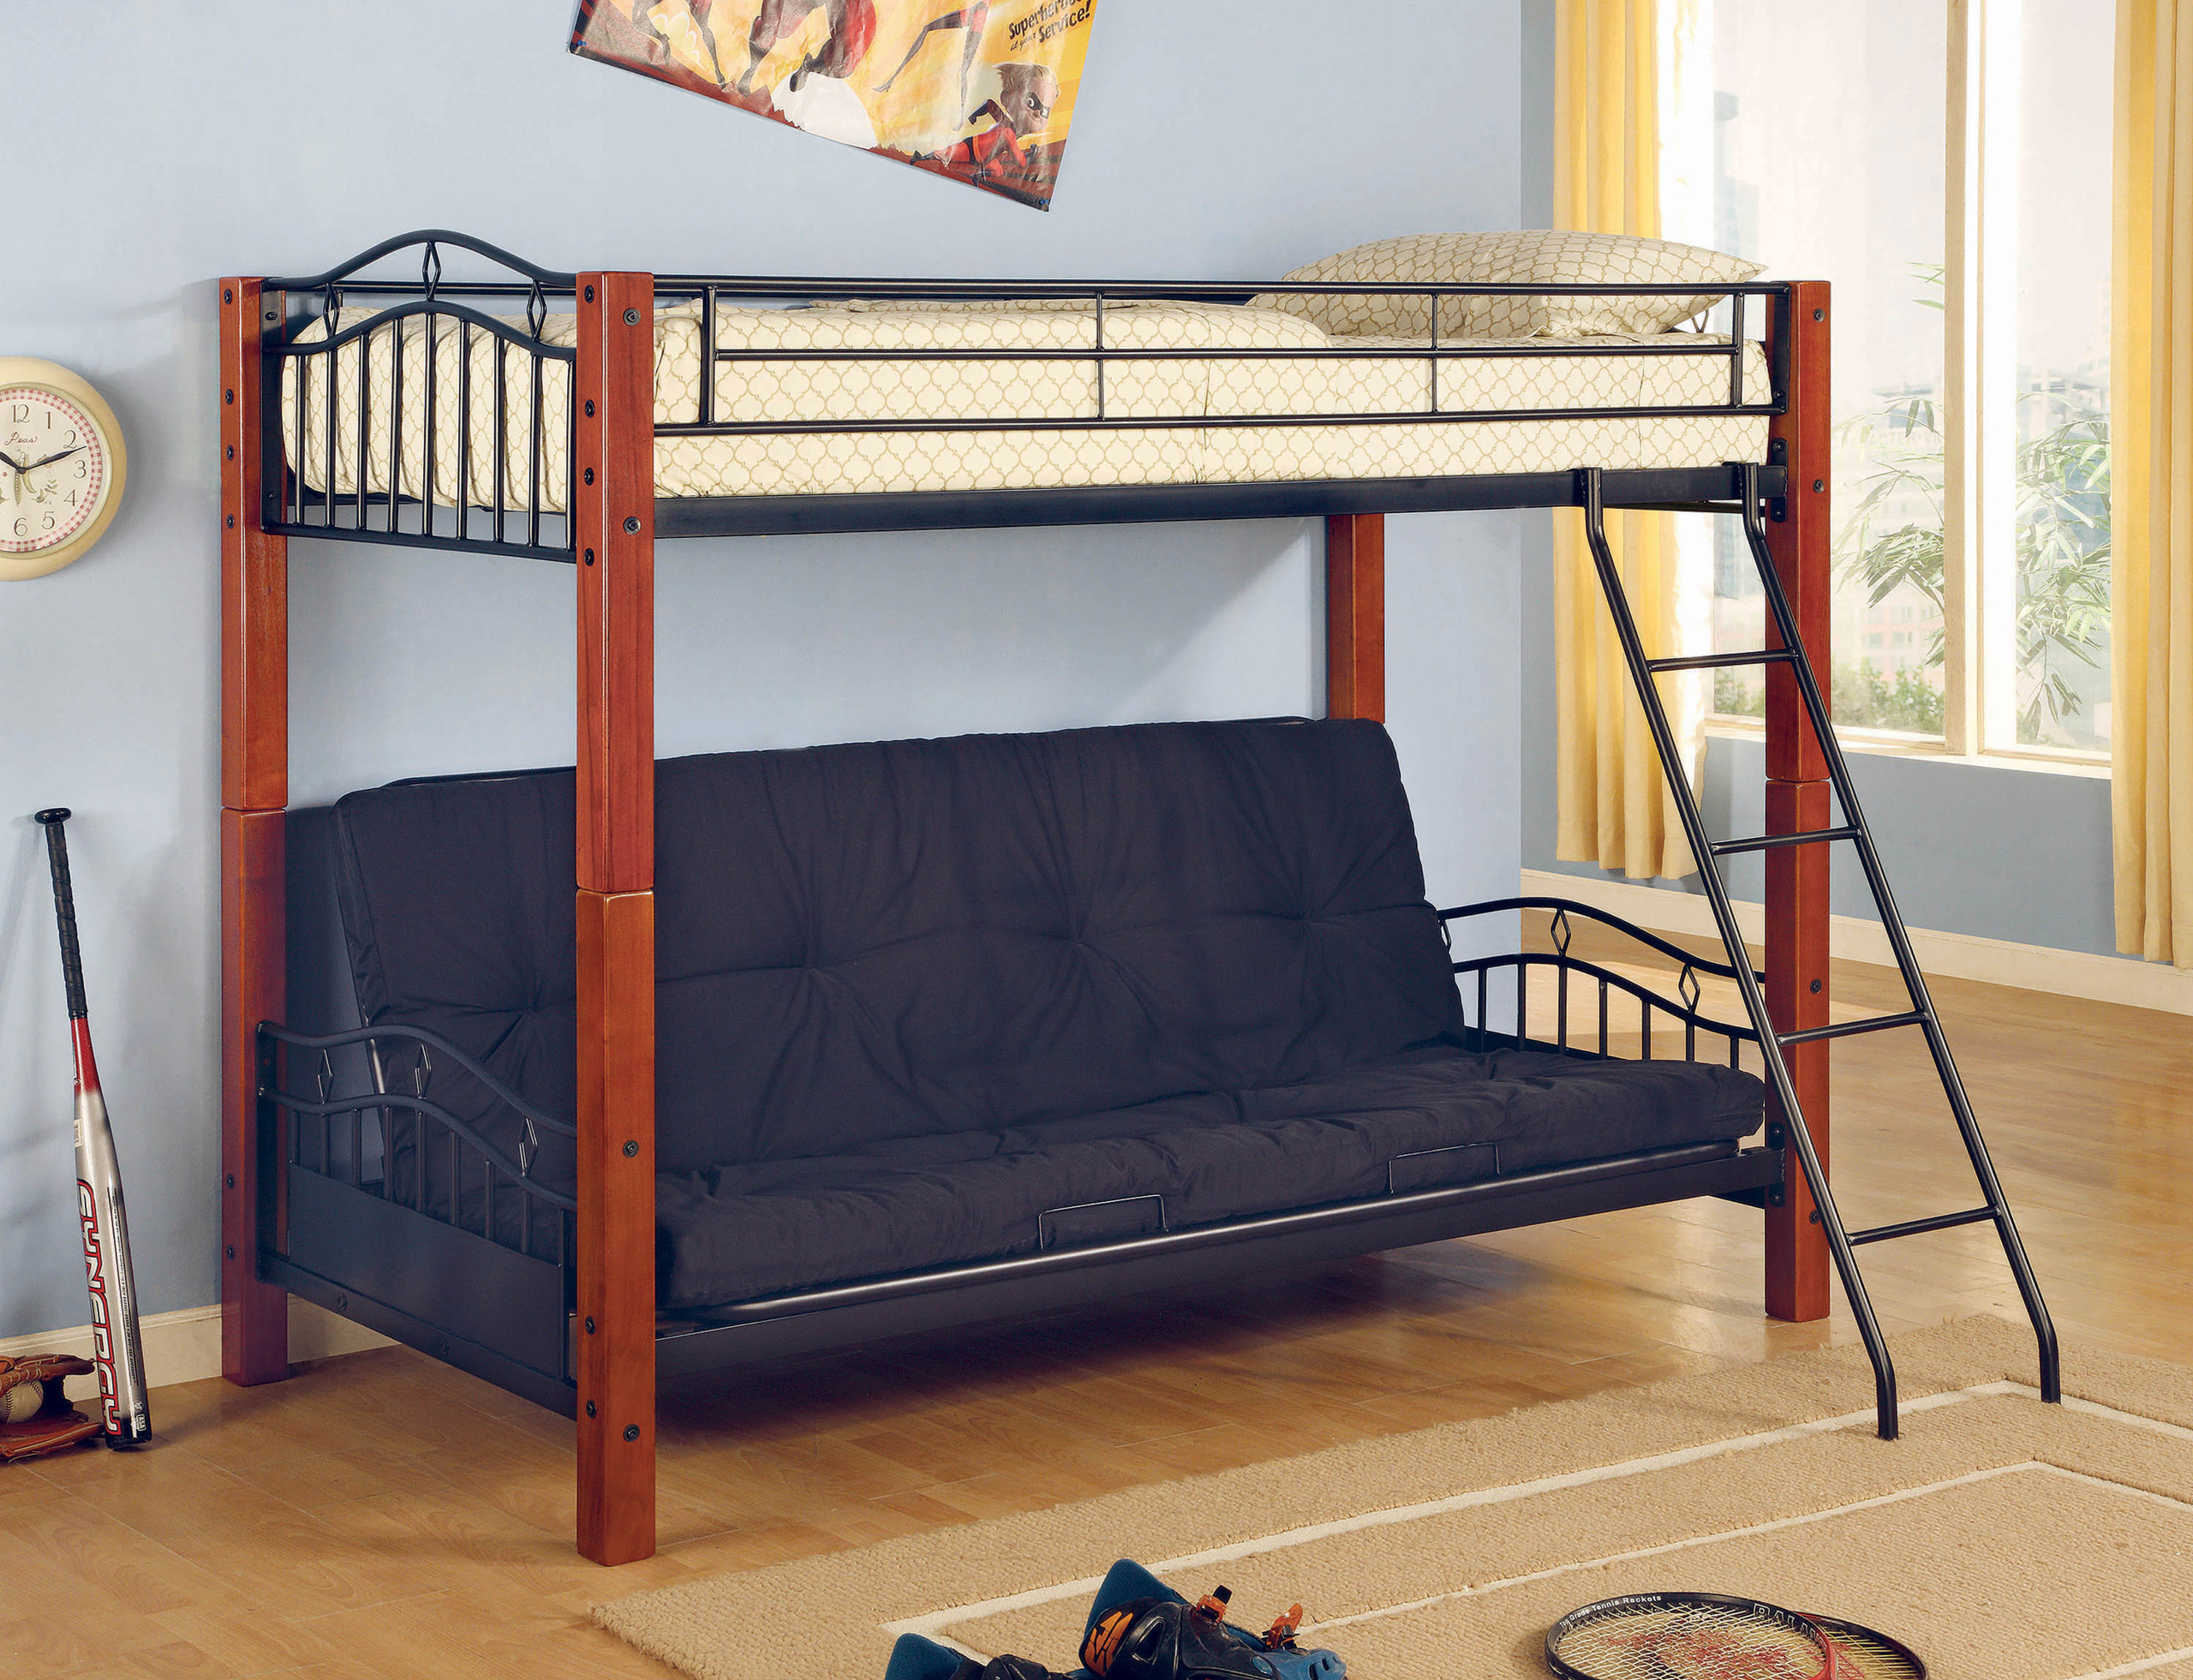 Full Over Futon Bunk Bed Visualhunt, Full Size Bunk Bed With Futon